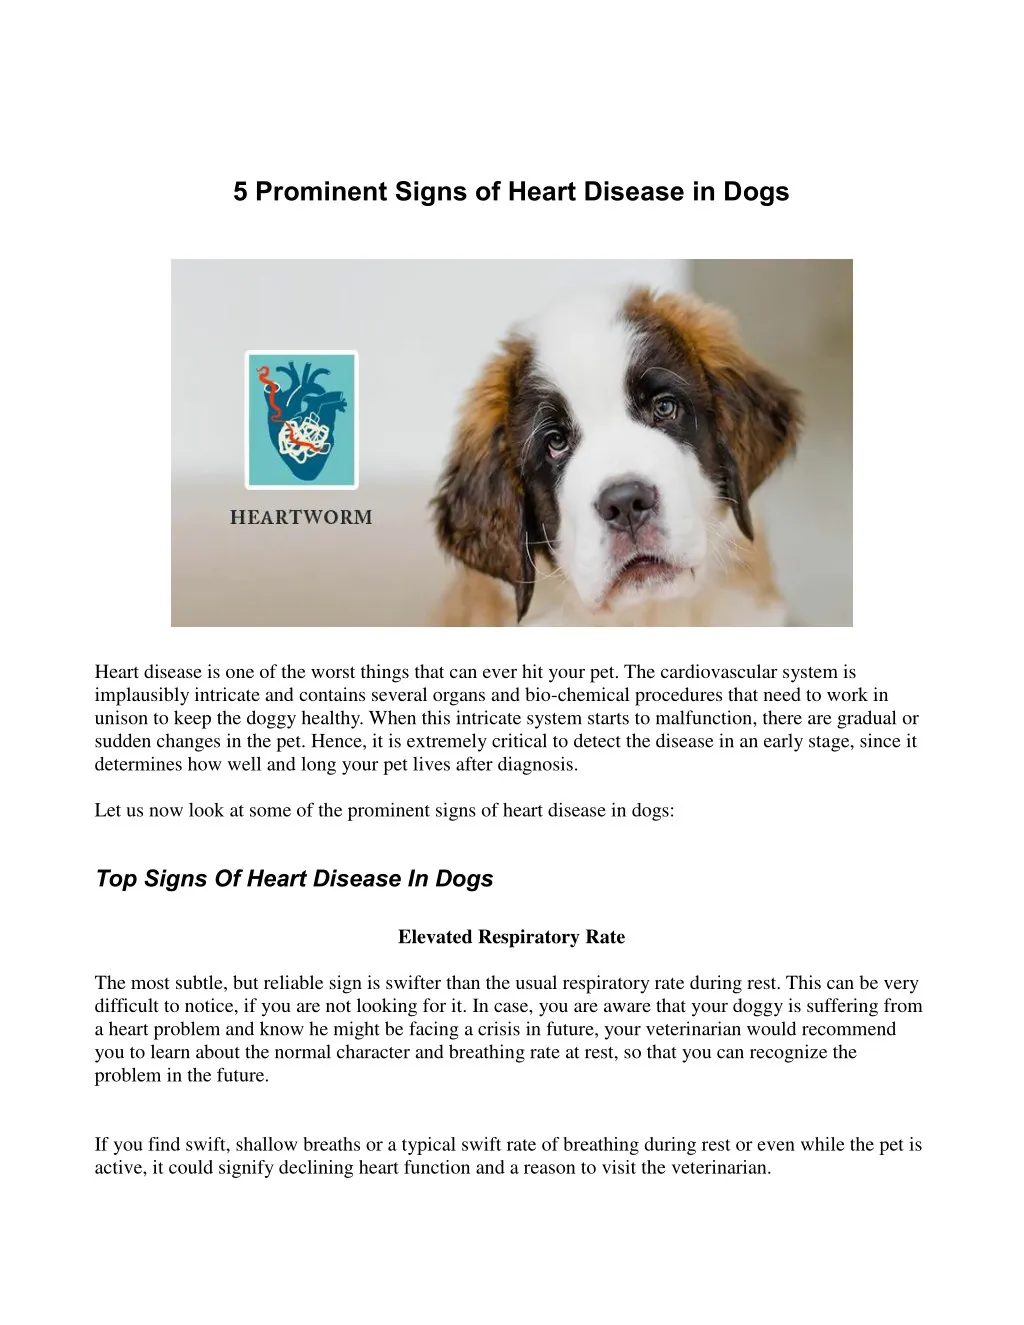 5 prominent signs of heart disease in dogs